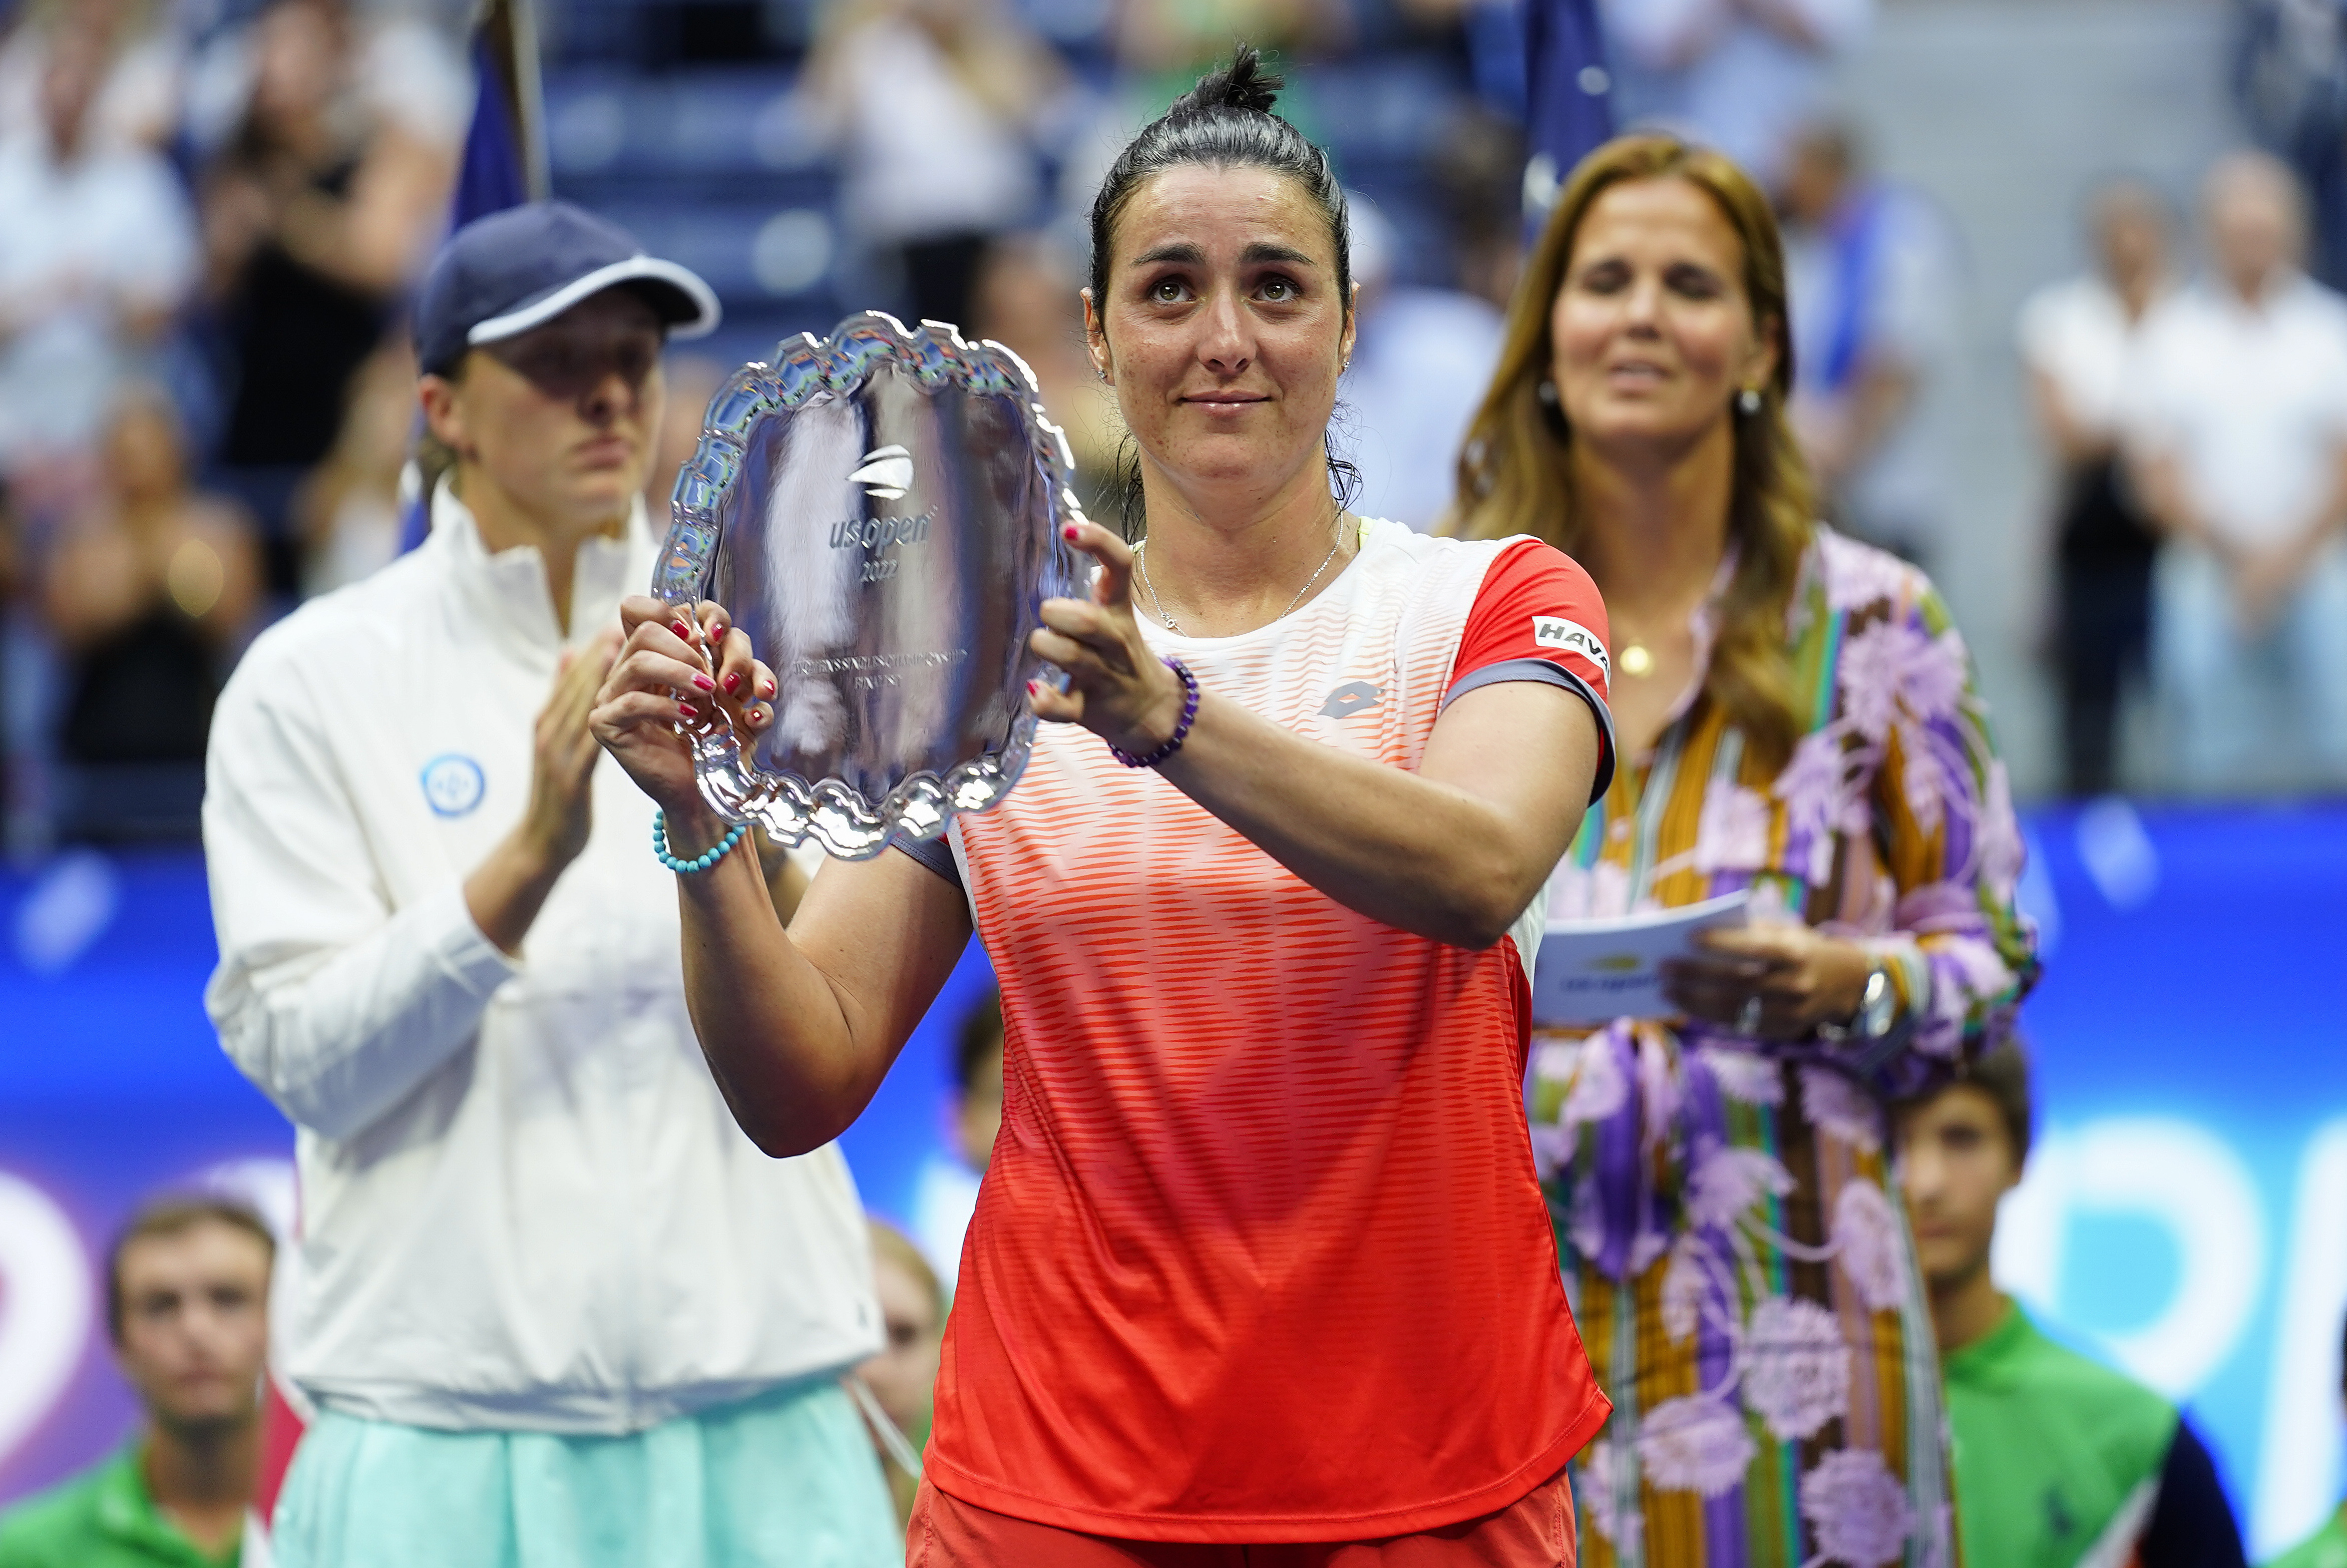 Ons Jabeur, of Tunisia, holds up the runner up trophy after losing to Iga Swiatek, of Poland, during the women's singles final of the U.S. Open tennis championships, Saturday, Sept. 10, 2022, in New York. (AP Photo/Matt Rourke)